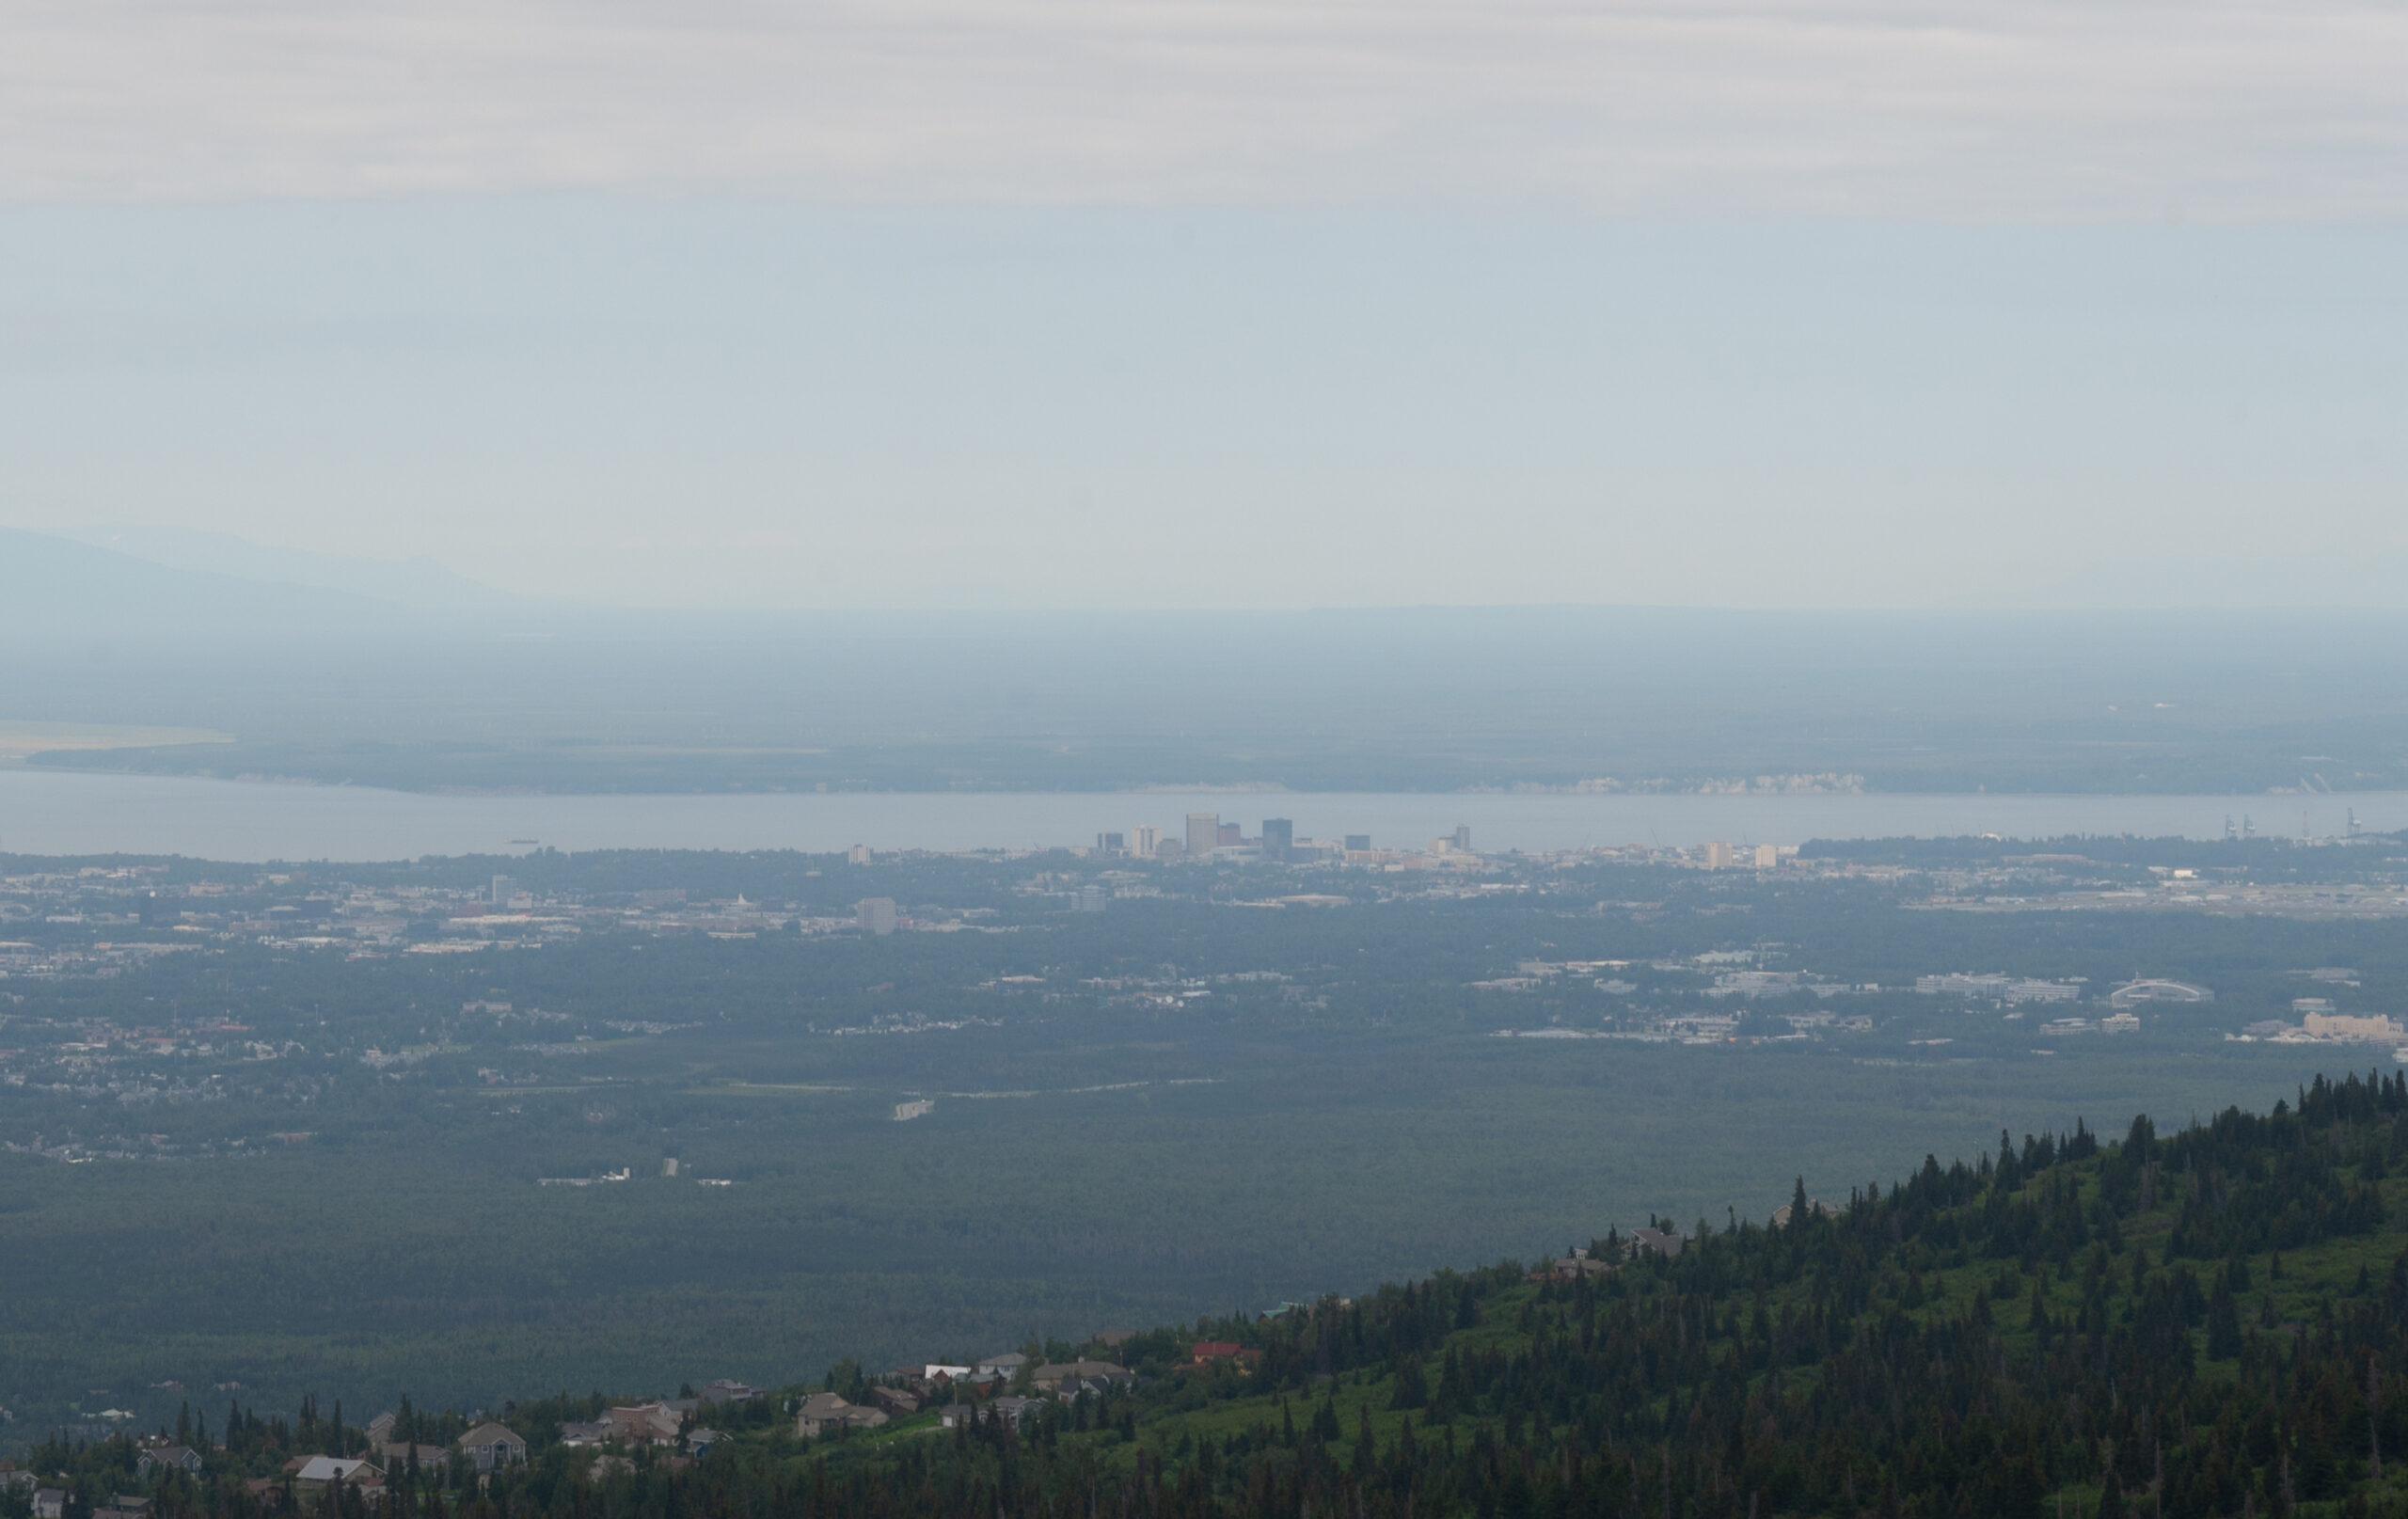 A picture of Anchorage Alaska's skyline.